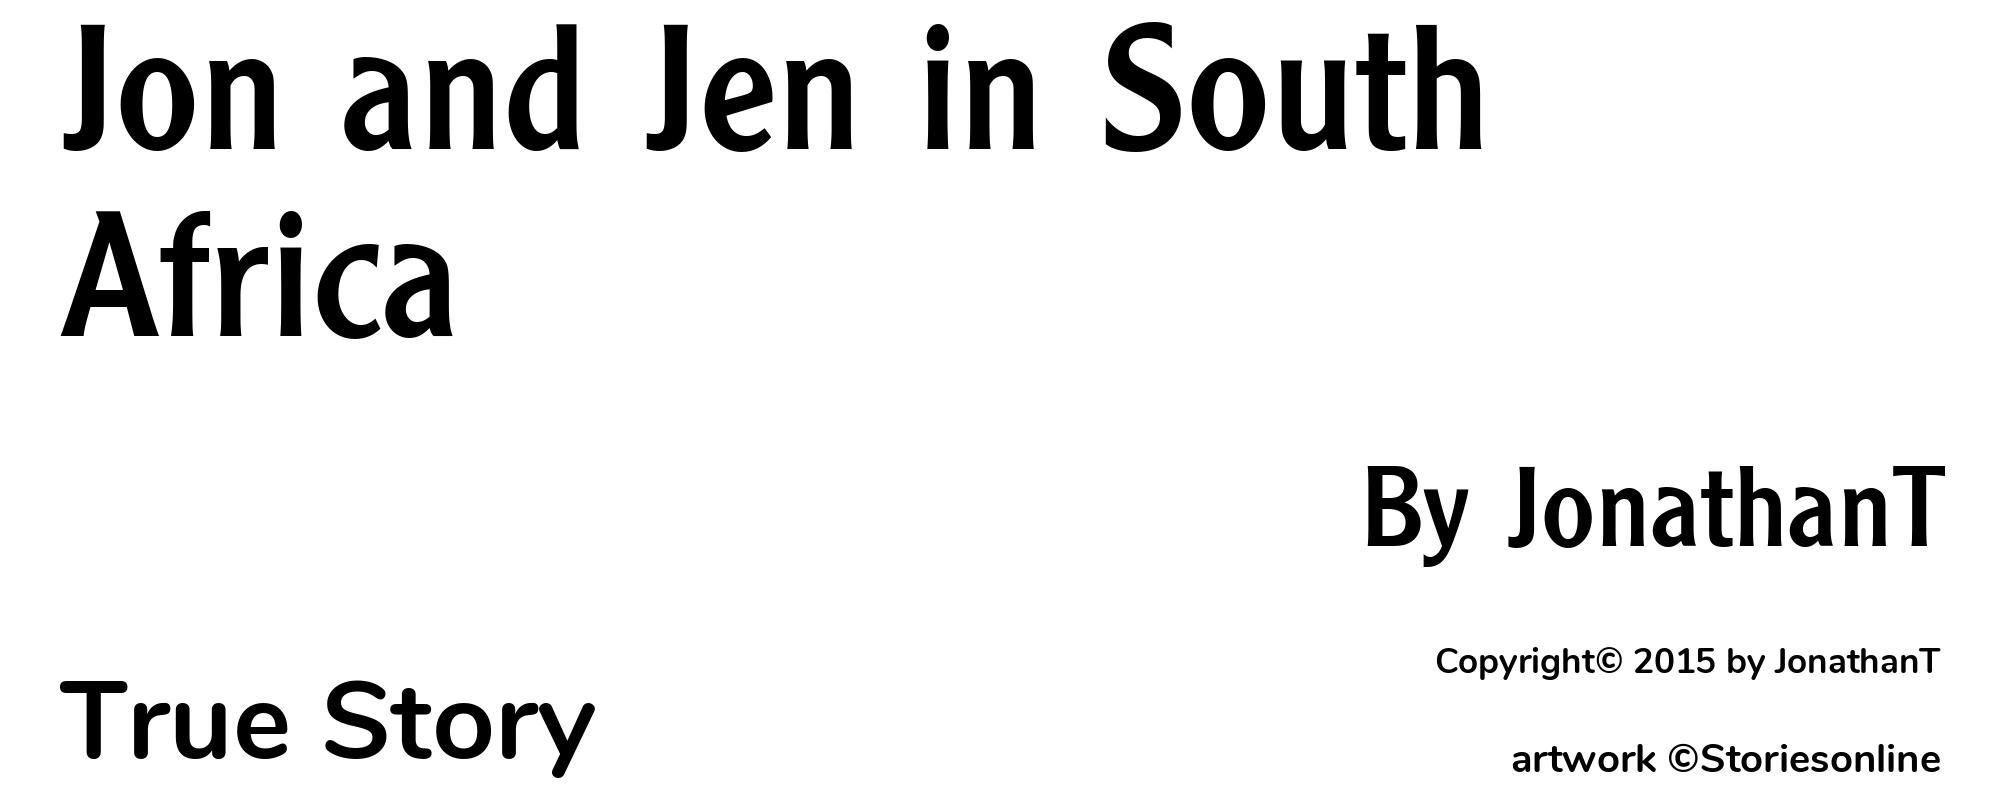 Jon and Jen in South Africa - Cover